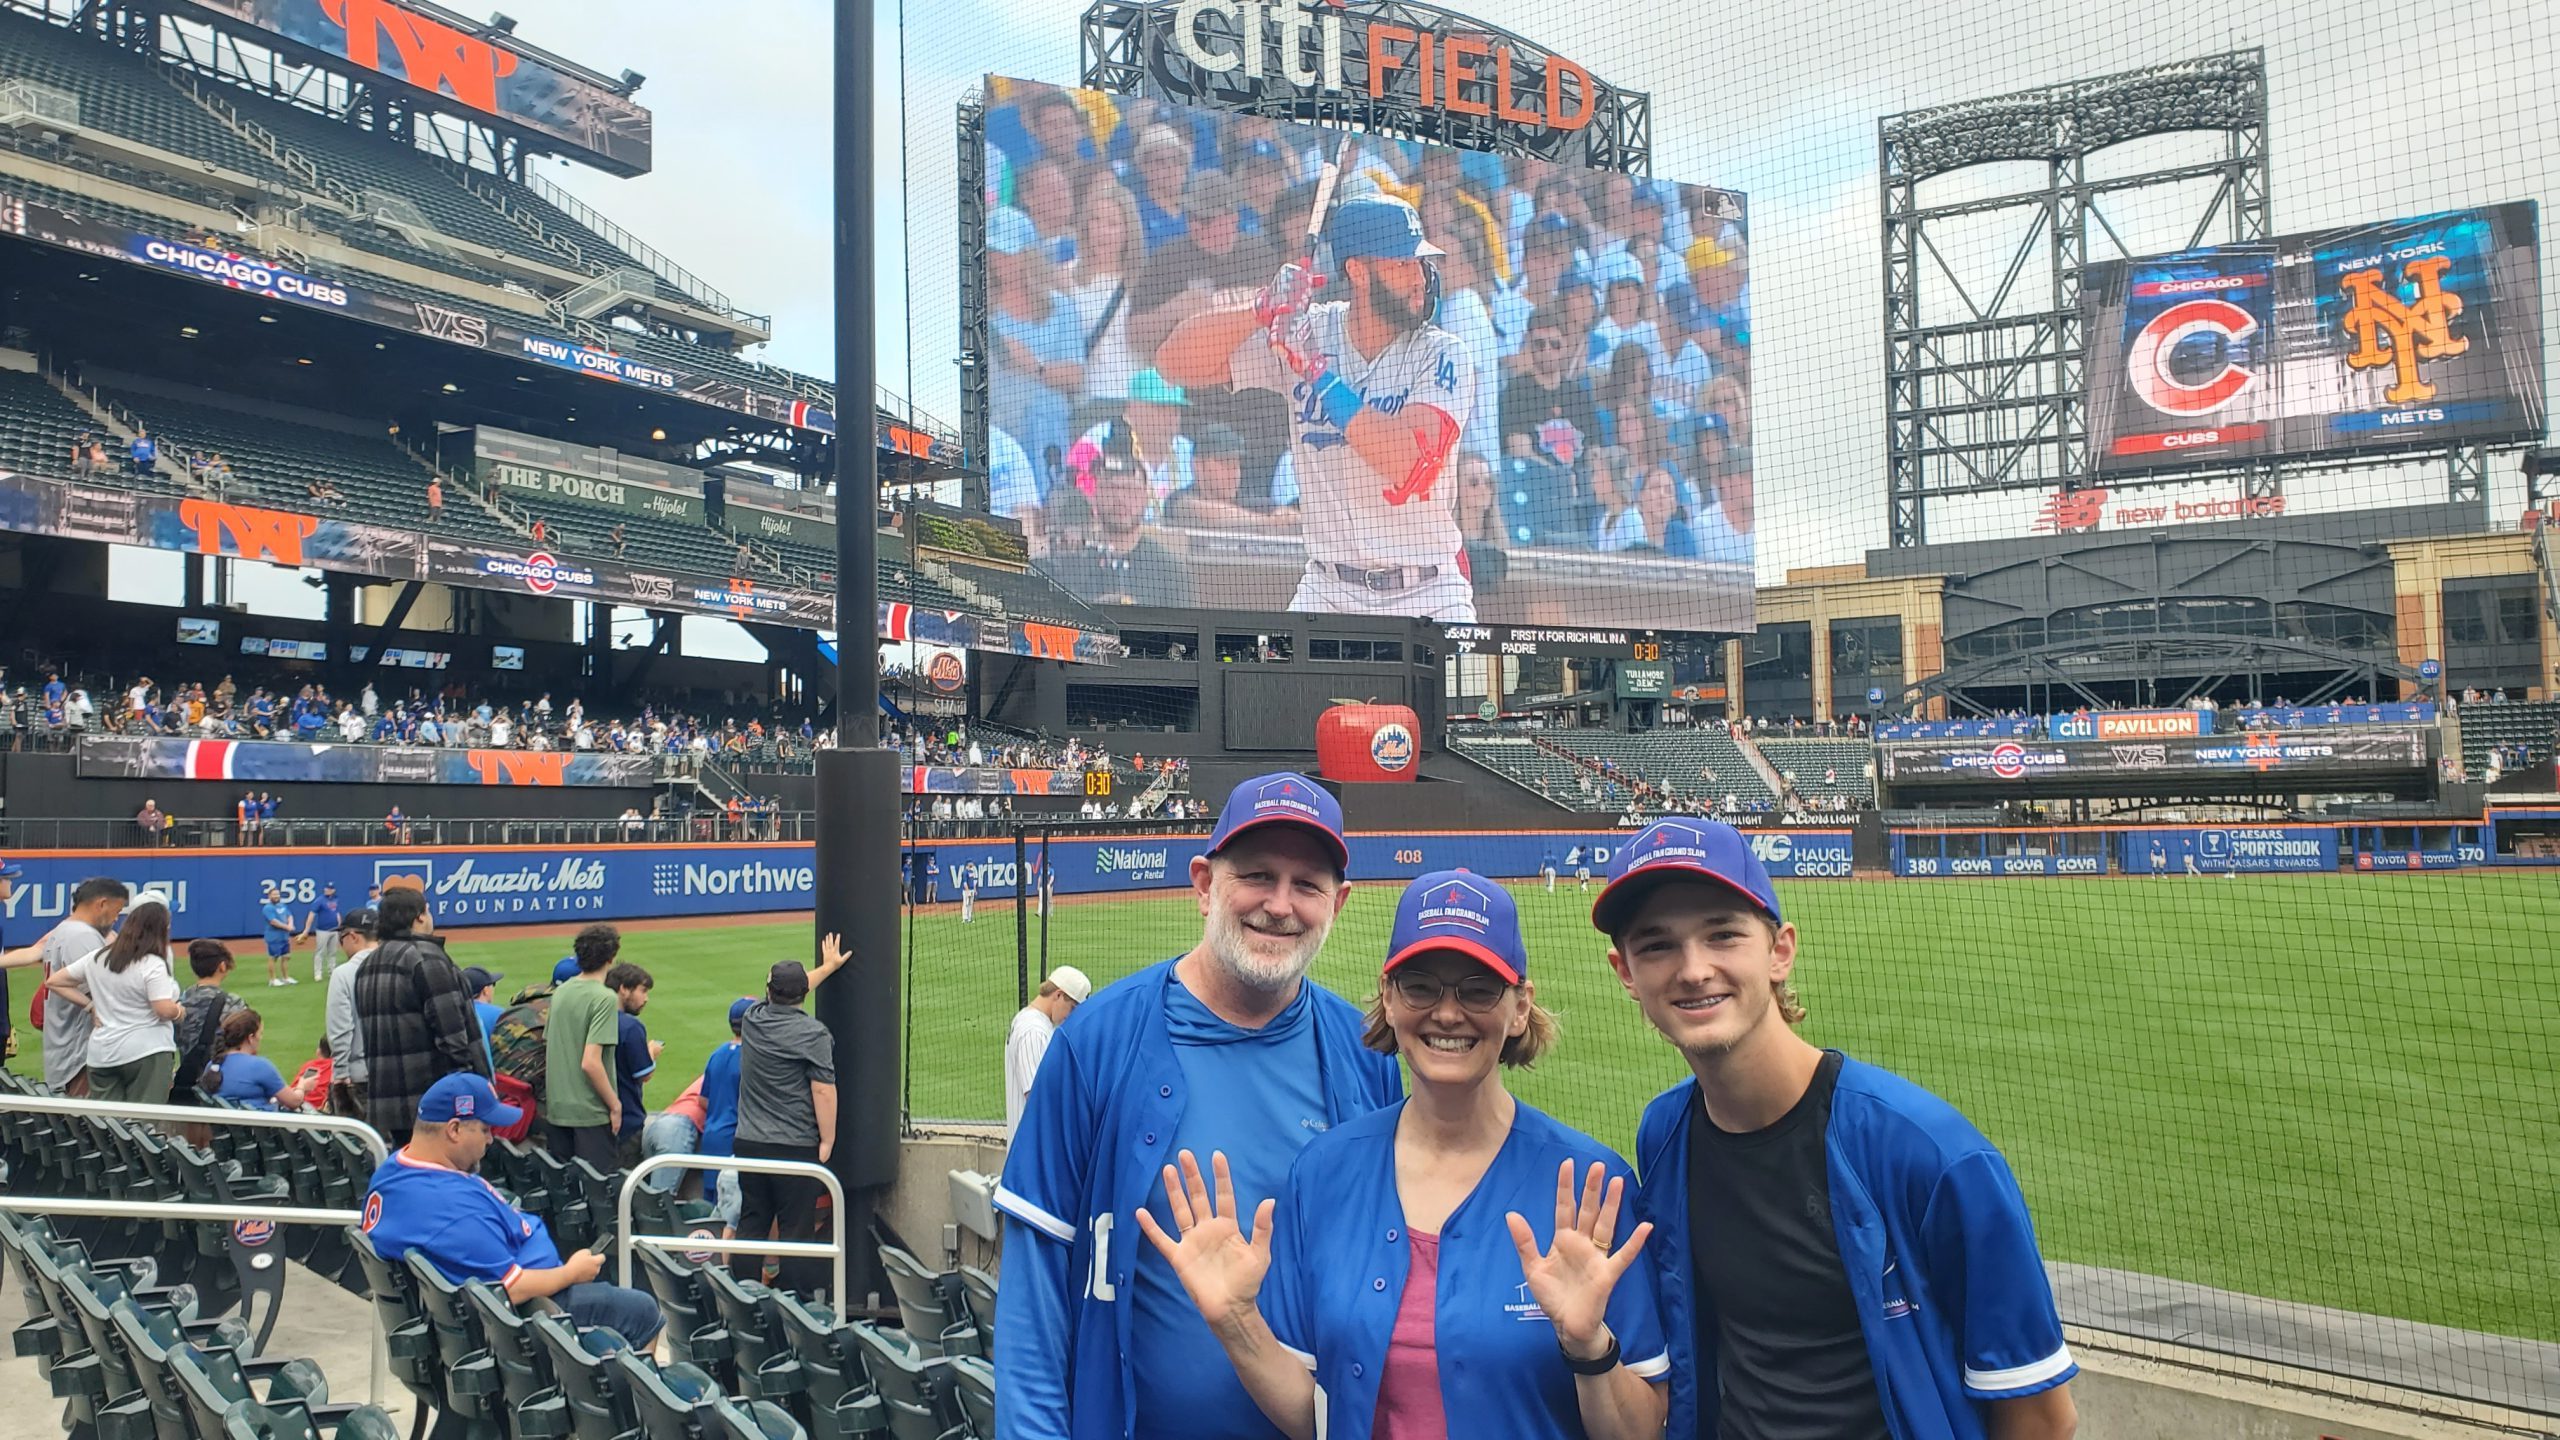 Photo of Brad, Heather and Ryan in front of the diamond at Citi Field.